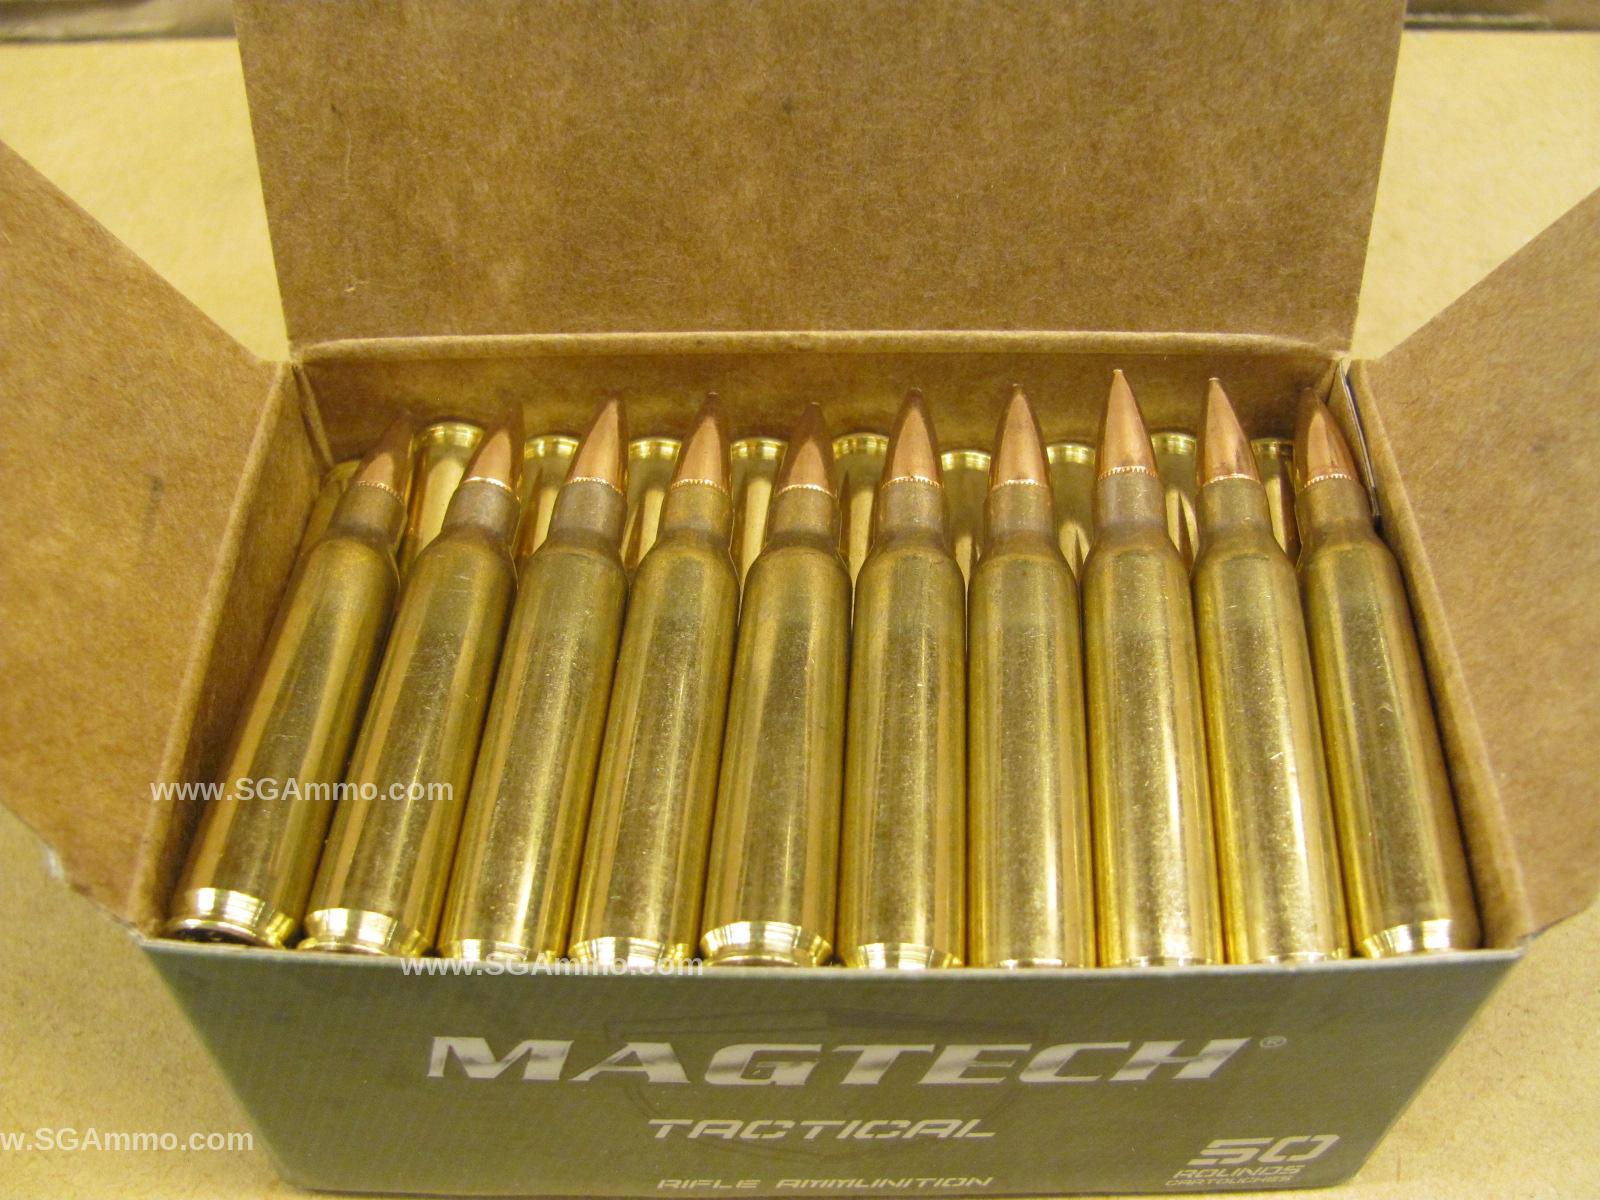 1000 Round Case - 5.56mm 55 Grain FMJ M193 Ball Ammo by Magtech - 556A